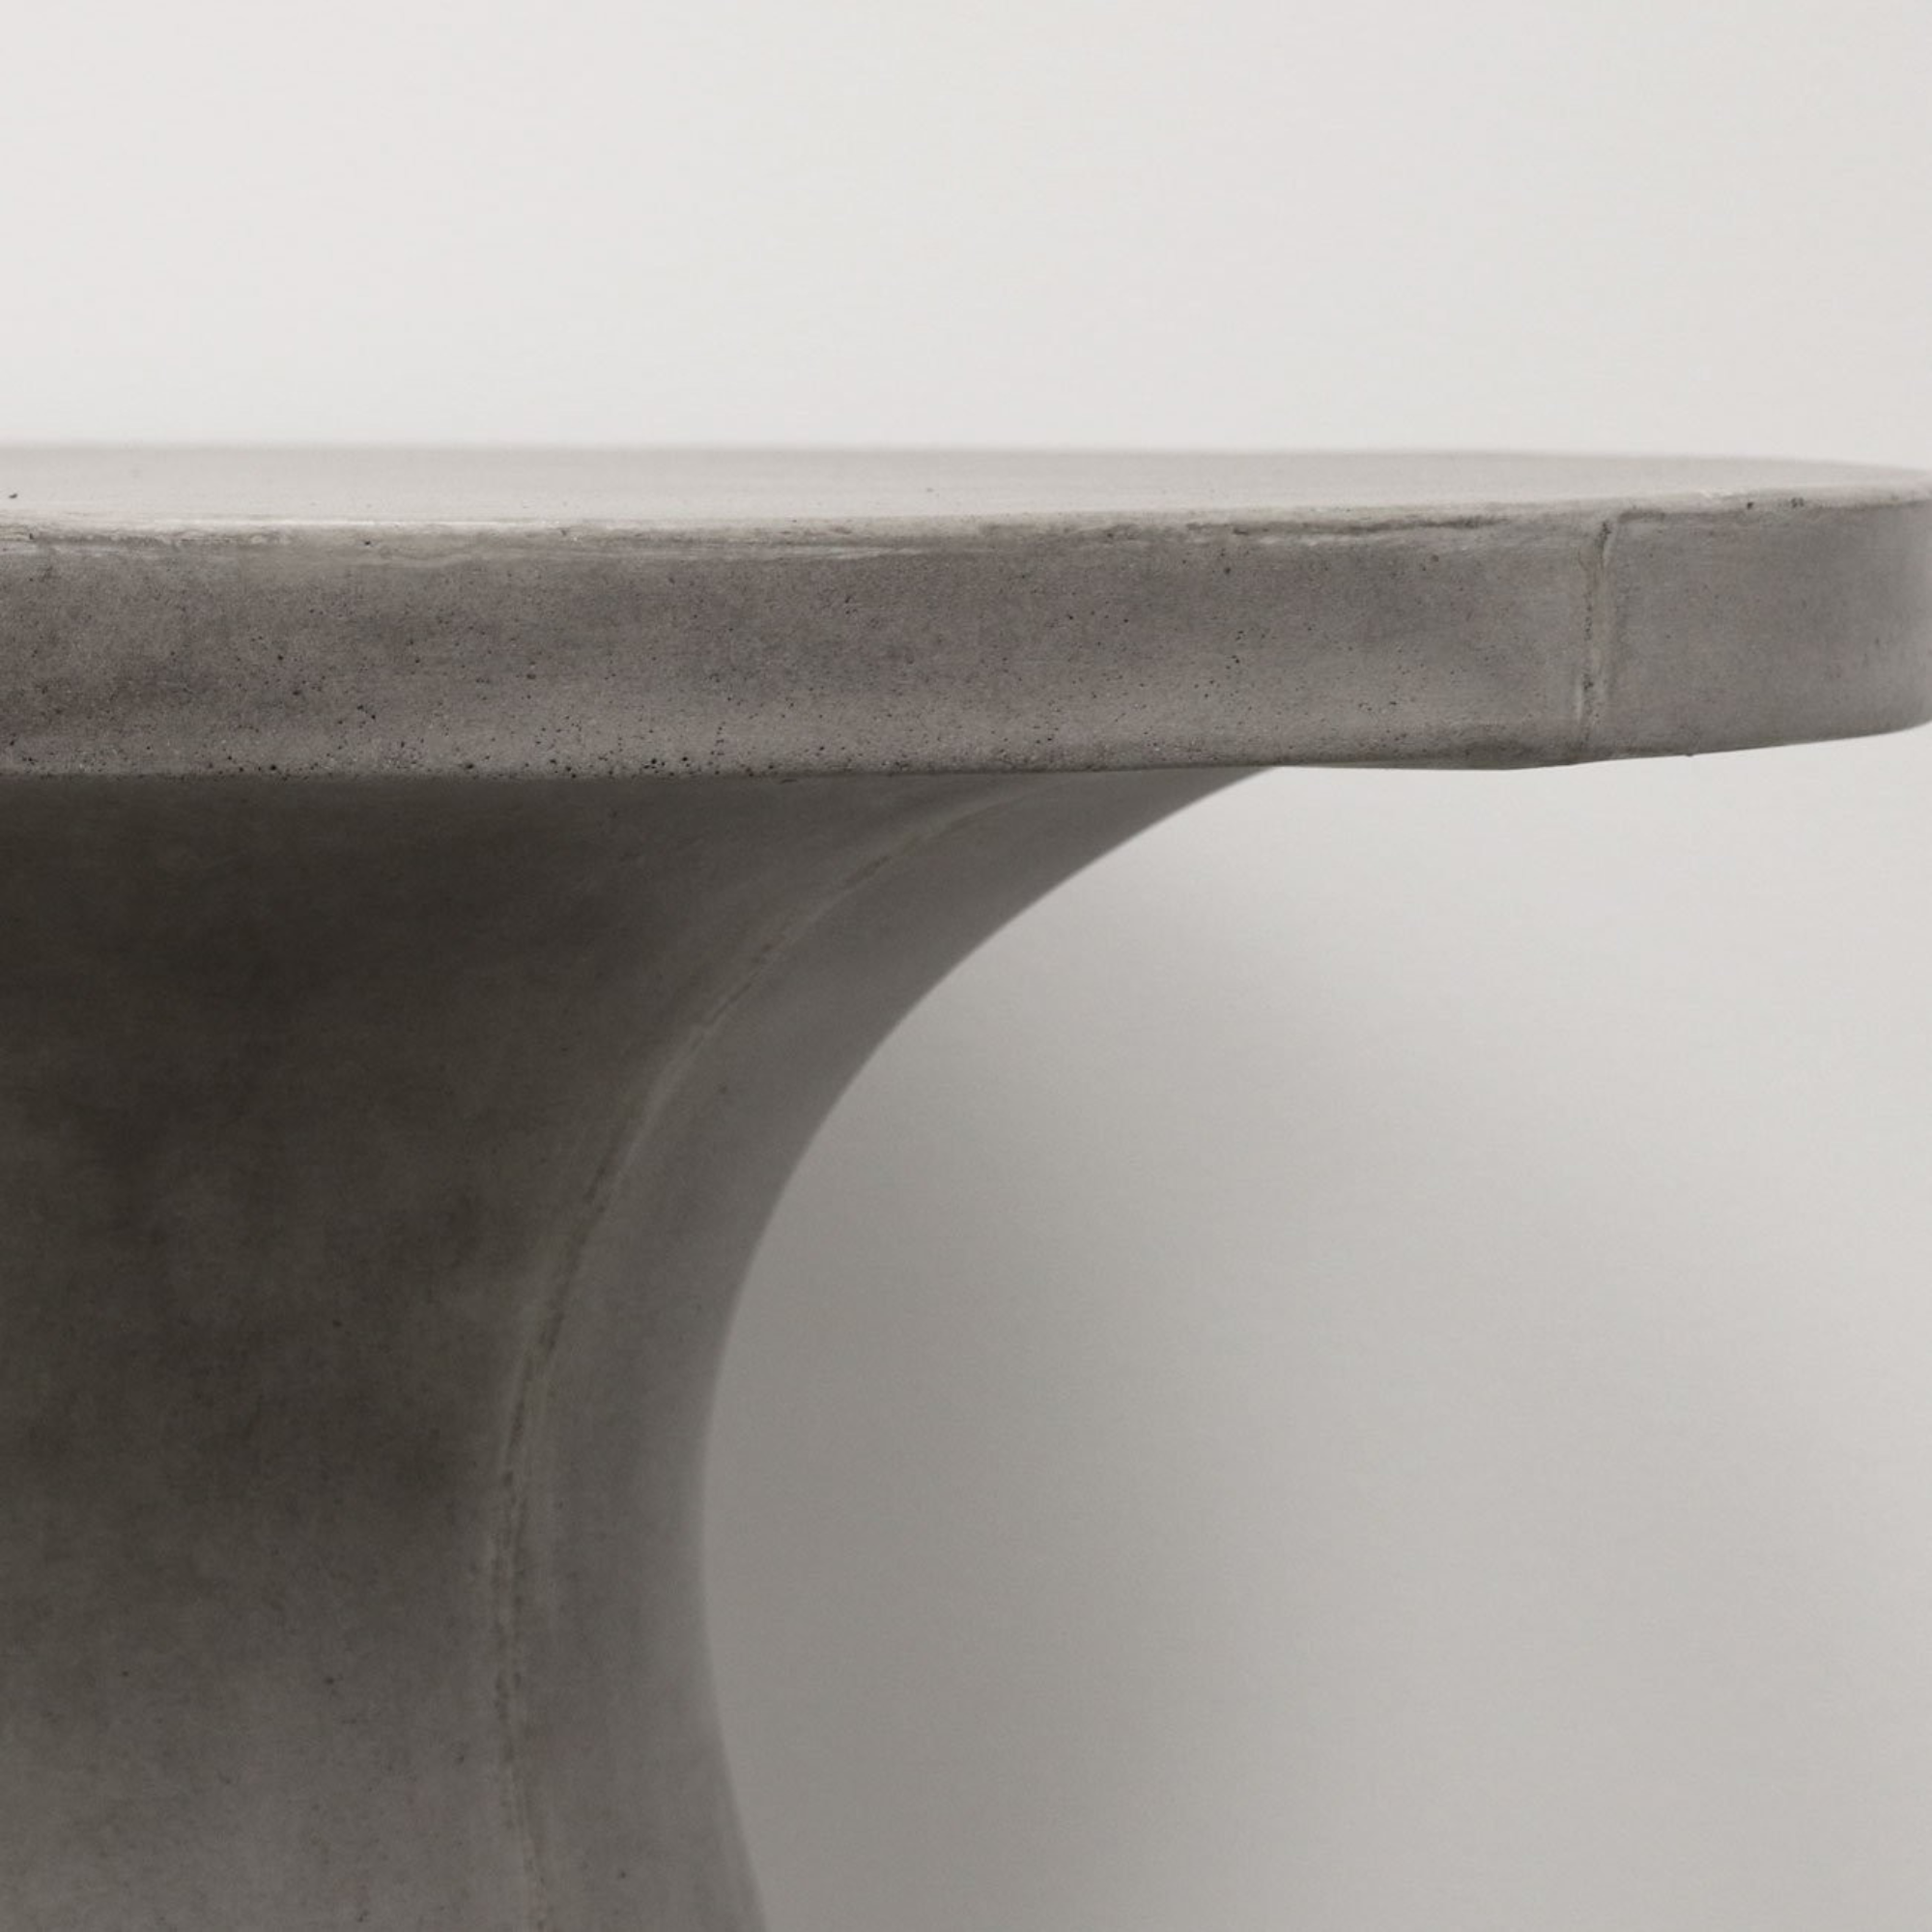 CORFU CONCRETE PEDESTAL SIDE OR SMALL DINING TABLE | WHITE OR GREY